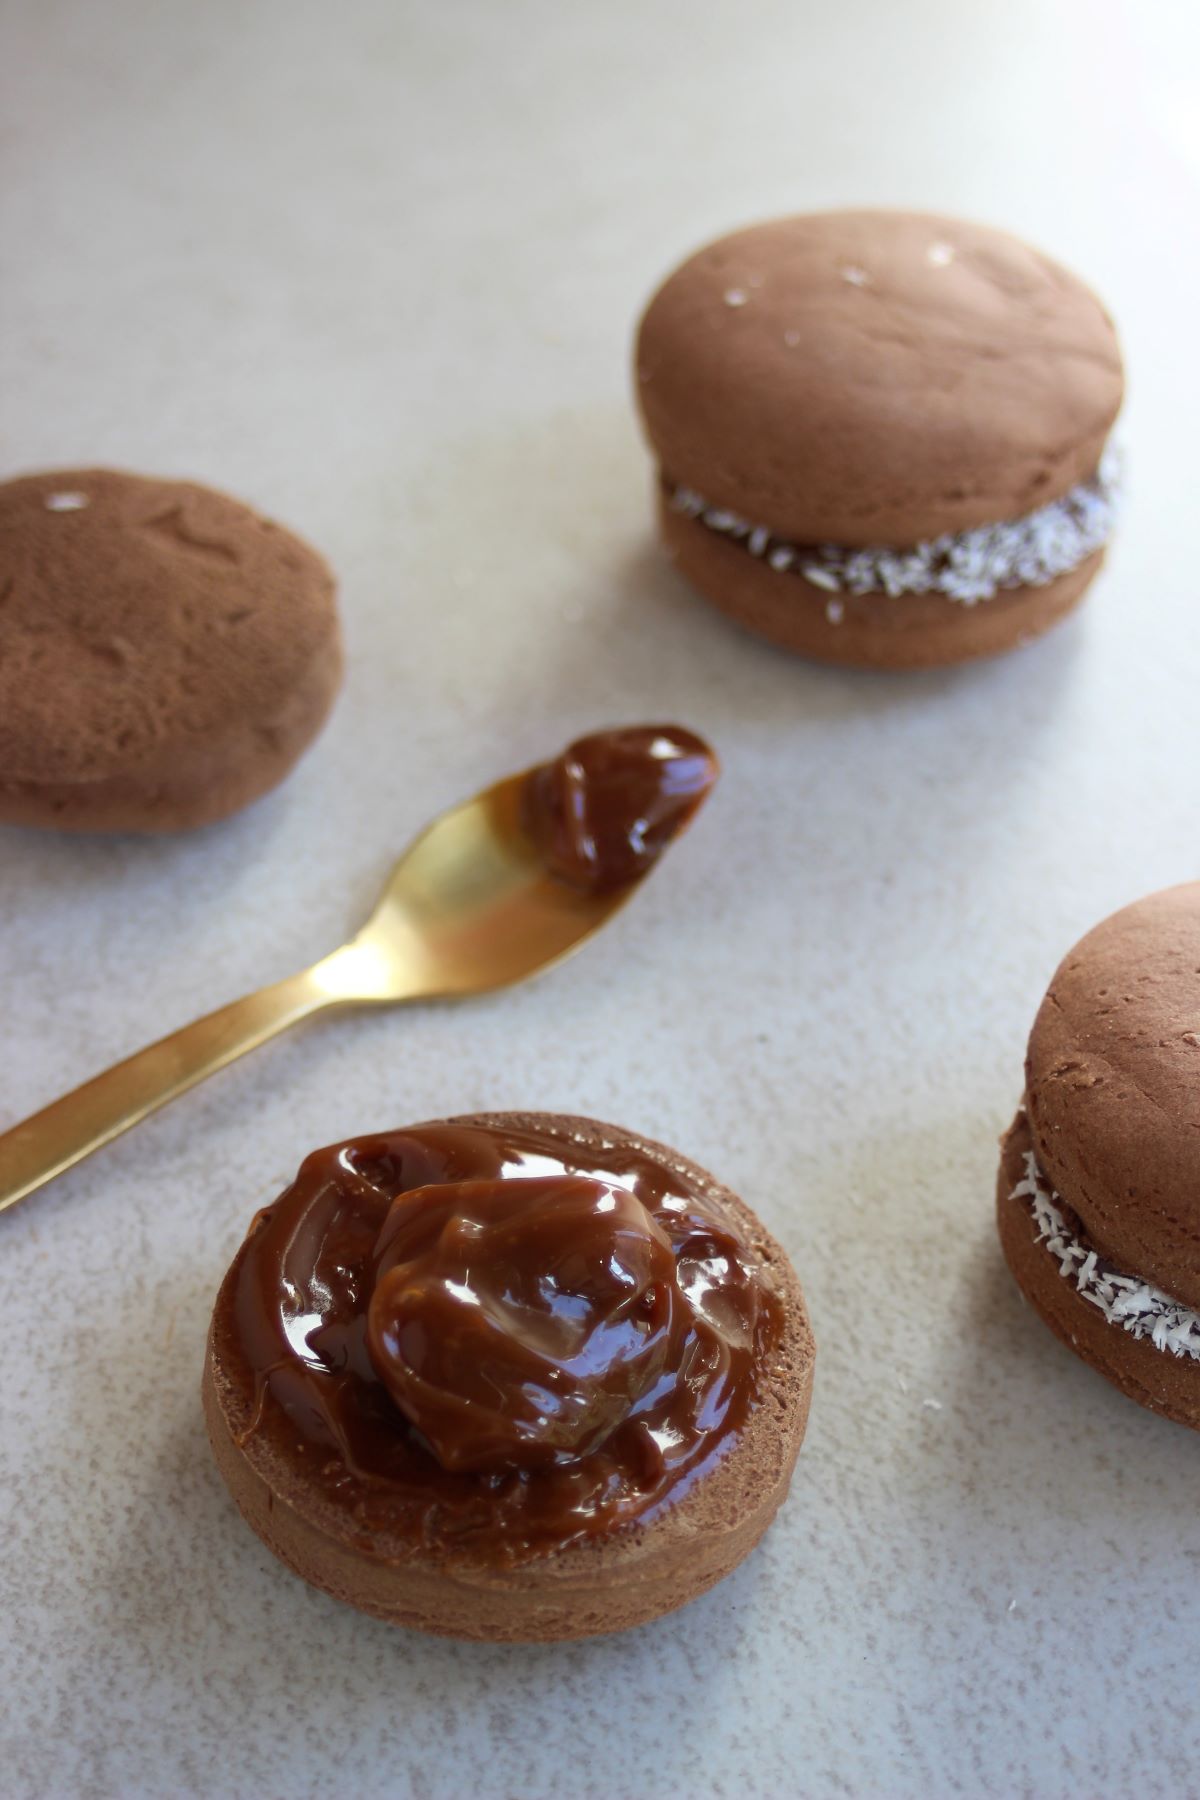 Chocolate biscuit with dulce de leche. Spoon with dulce de leche and two chocolate alfajores around.